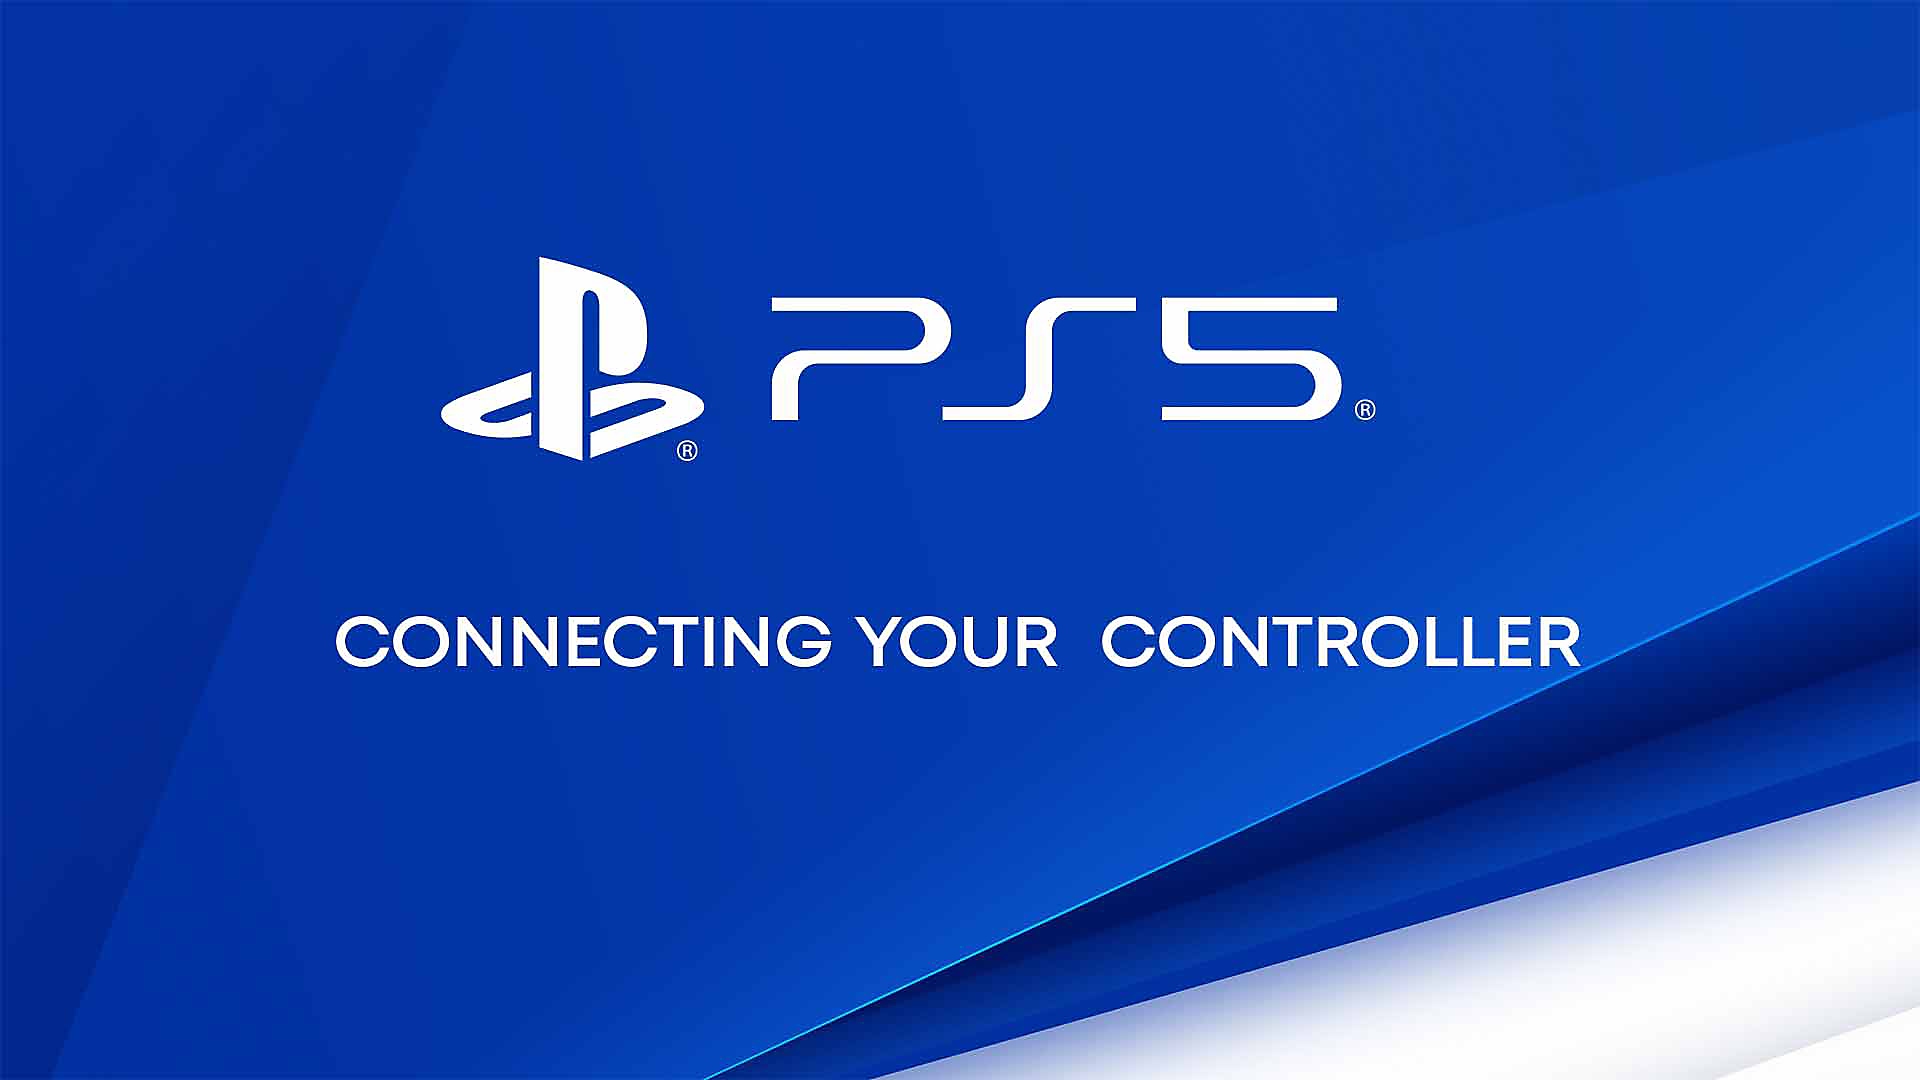 Video showing how to pair an Access controller with a PS5 console